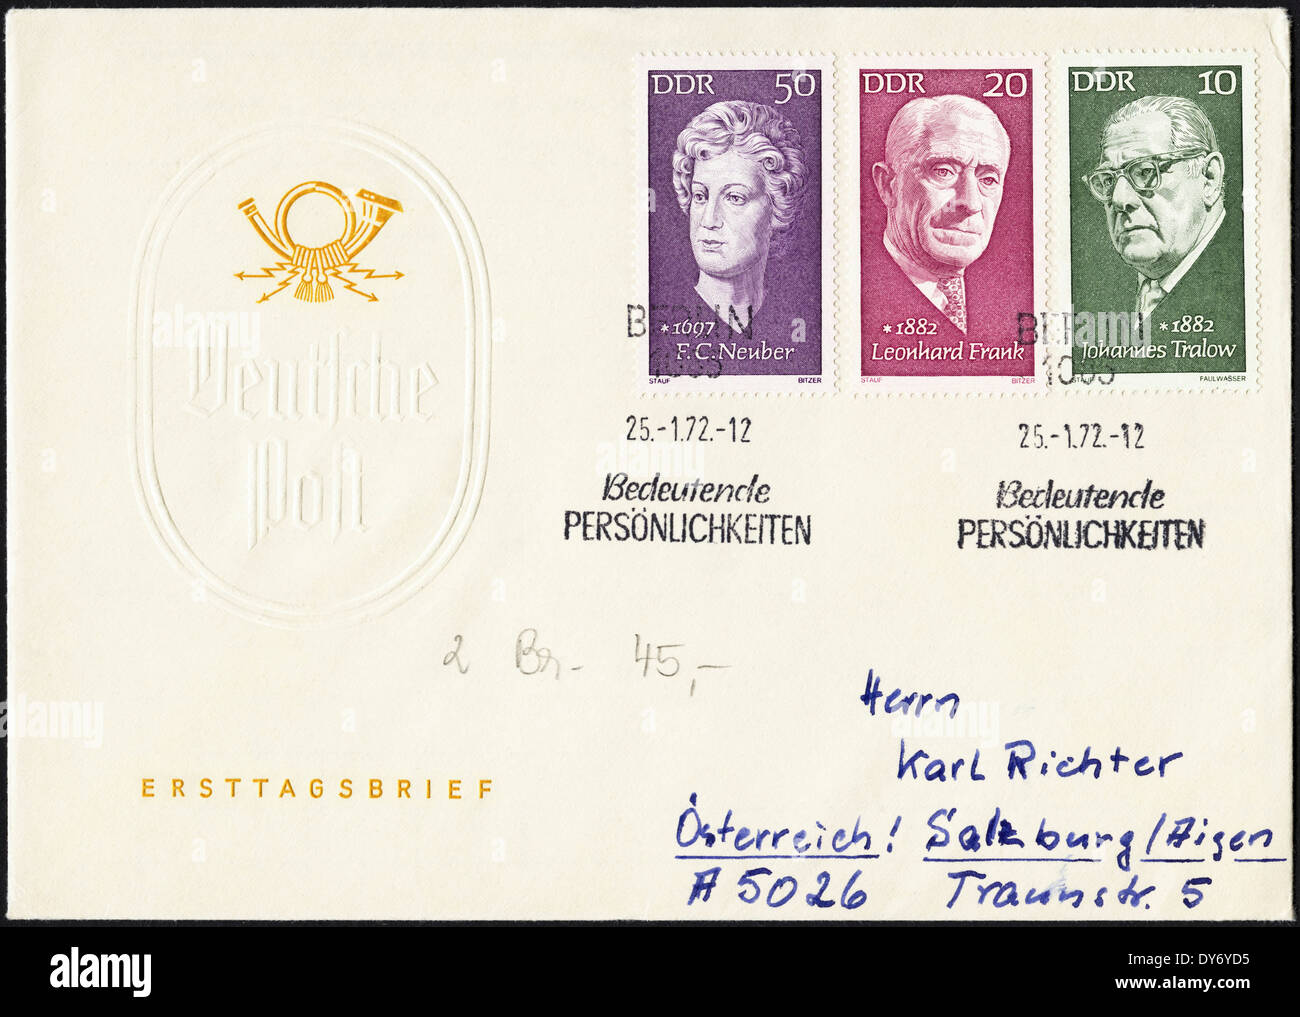 Commemorative first day cover East Germany DDR postage stamps featuring famous East Germans postmarked Berlin 25th January 1972 Stock Photo